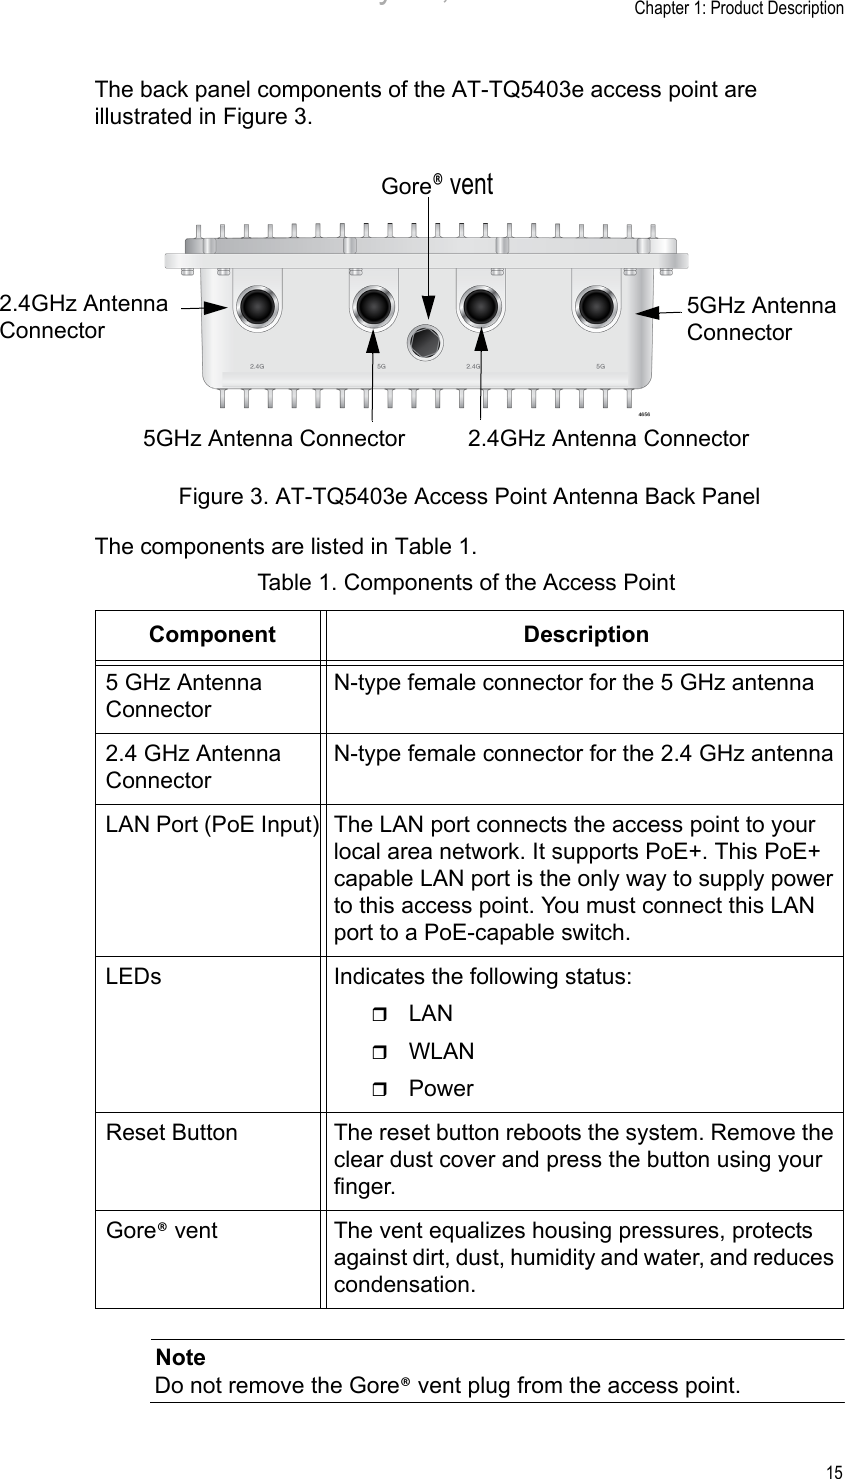 Chapter 1: Product Description15The back panel components of the AT-TQ5403e access point are illustrated in Figure 3.Figure 3. AT-TQ5403e Access Point Antenna Back PanelThe components are listed in Table 1.NoteDo not remove the Gore® vent plug from the access point.5GHz Antenna Connector 2.4GHz Antenna ConnectorGore® vent2.4GHz AntennaConnector5GHz AntennaConnectorTable 1. Components of the Access PointComponent Description5 GHz Antenna ConnectorN-type female connector for the 5 GHz antenna2.4 GHz Antenna ConnectorN-type female connector for the 2.4 GHz antennaLAN Port (PoE Input) The LAN port connects the access point to your local area network. It supports PoE+. This PoE+ capable LAN port is the only way to supply power to this access point. You must connect this LAN port to a PoE-capable switch.LEDs Indicates the following status:LANWLANPowerReset Button The reset button reboots the system. Remove the clear dust cover and press the button using your finger.Gore® vent The vent equalizes housing pressures, protects against dirt, dust, humidity and water, and reduces condensation.Draft 5 on February 14, 2019